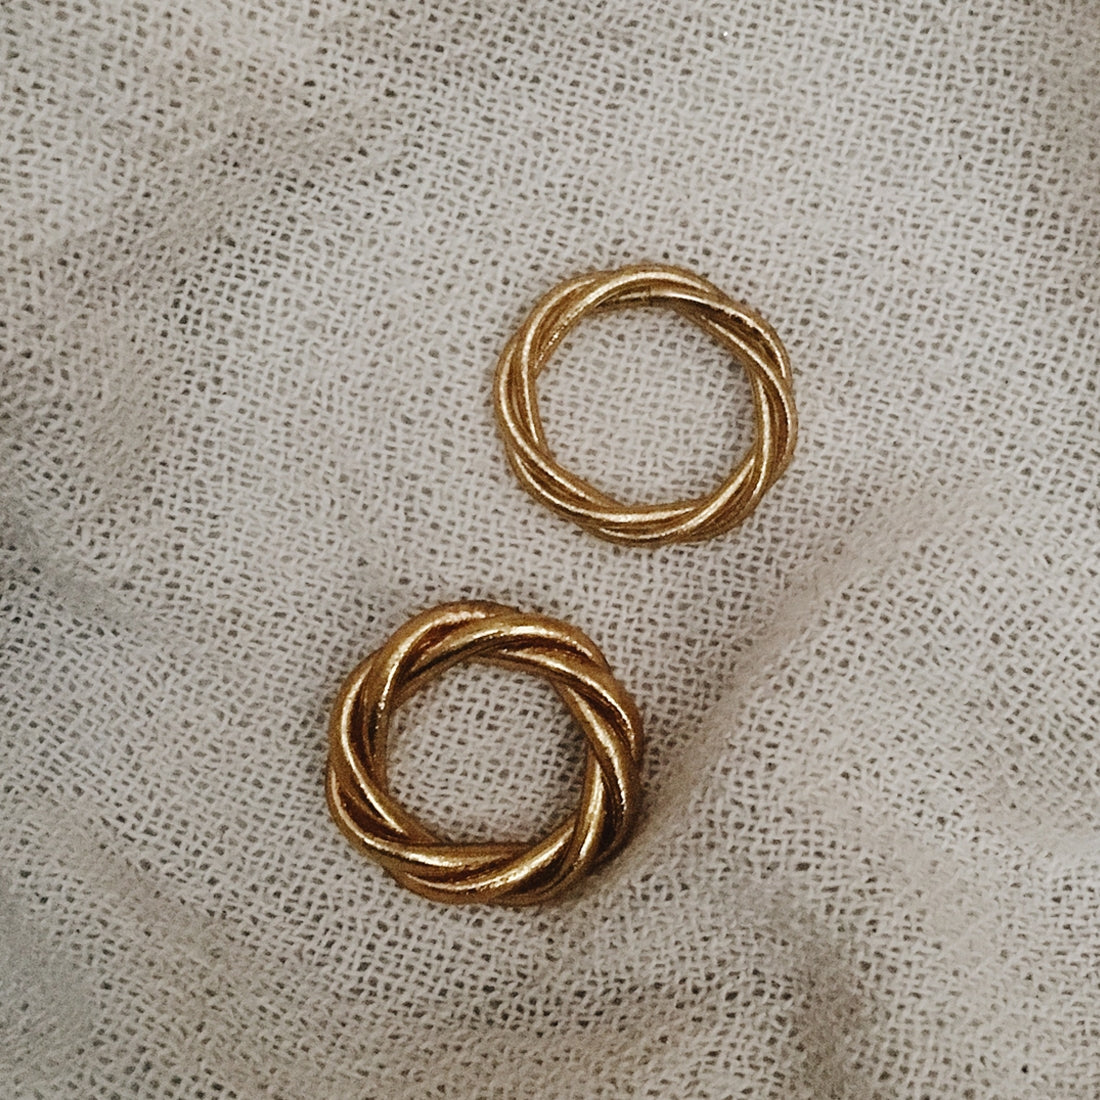 Twisted Golden Buddhist Ring